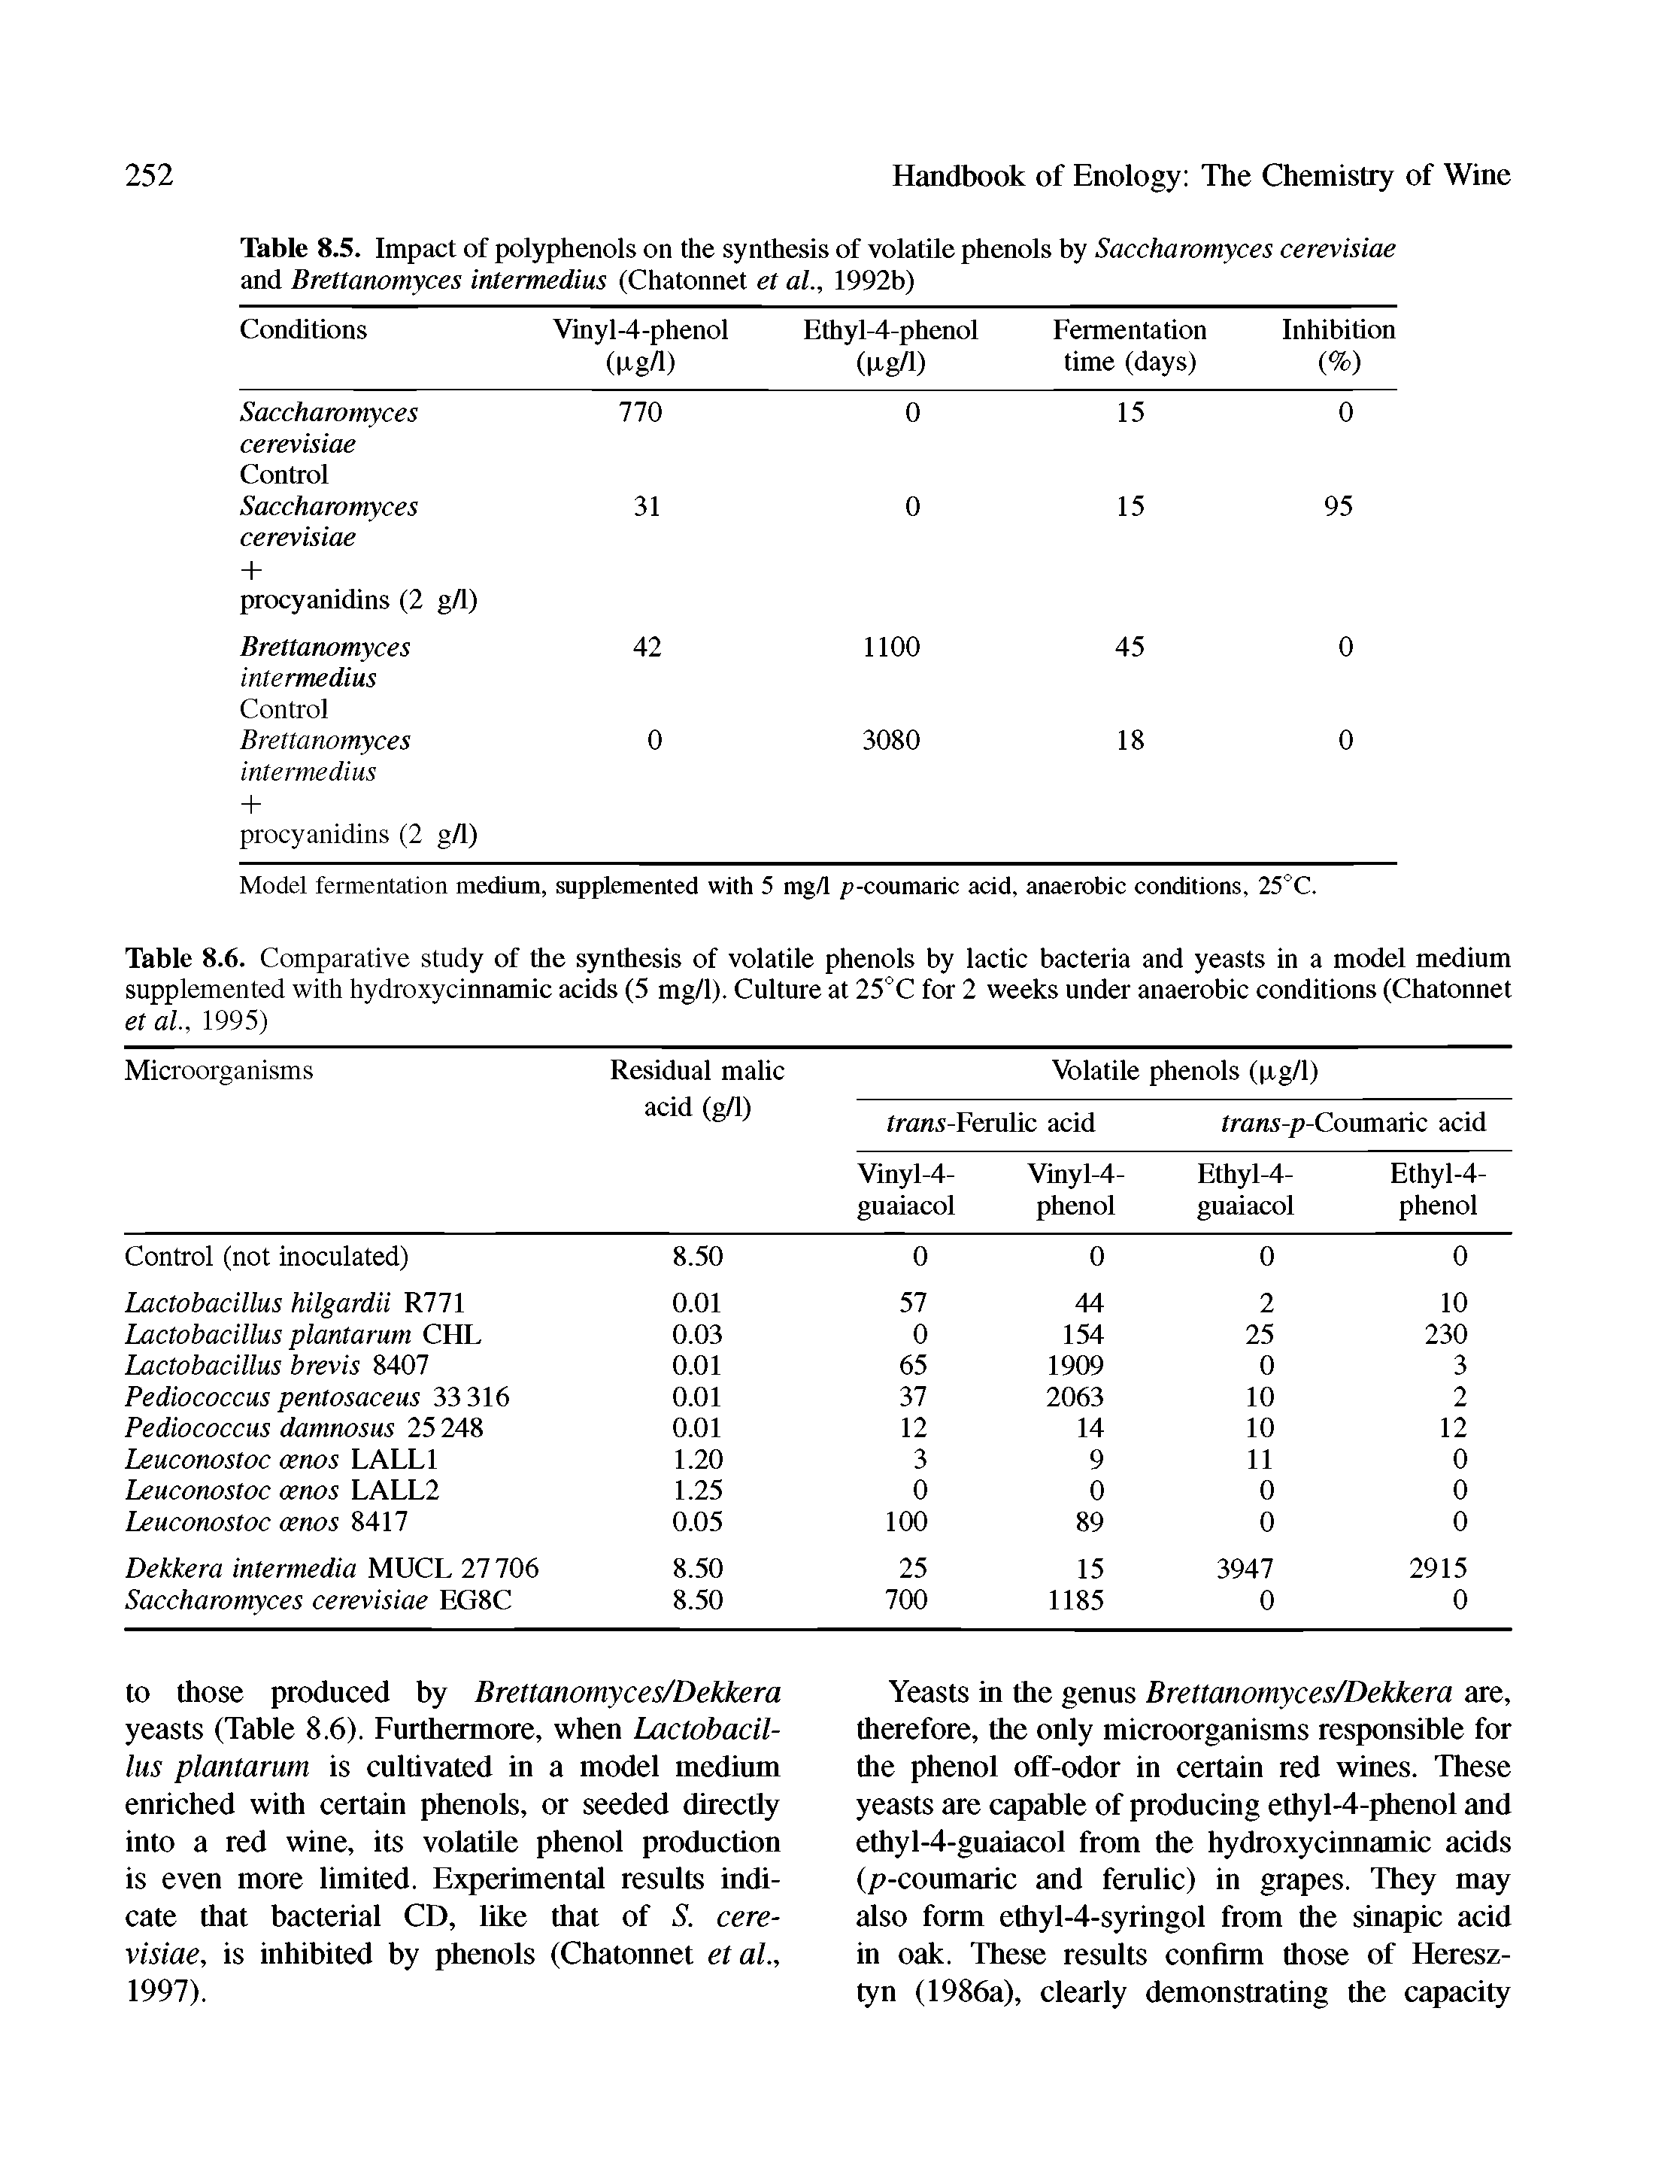 Table 8.6. Comparative study of the synthesis of volatile phenols by lactic bacteria and yeasts in a model medium supplemented with hydroxycinnamic acids (5 mg/1). Culture at 25°C for 2 weeks under anaerobic conditions (Chatonnet et al., 1995)...